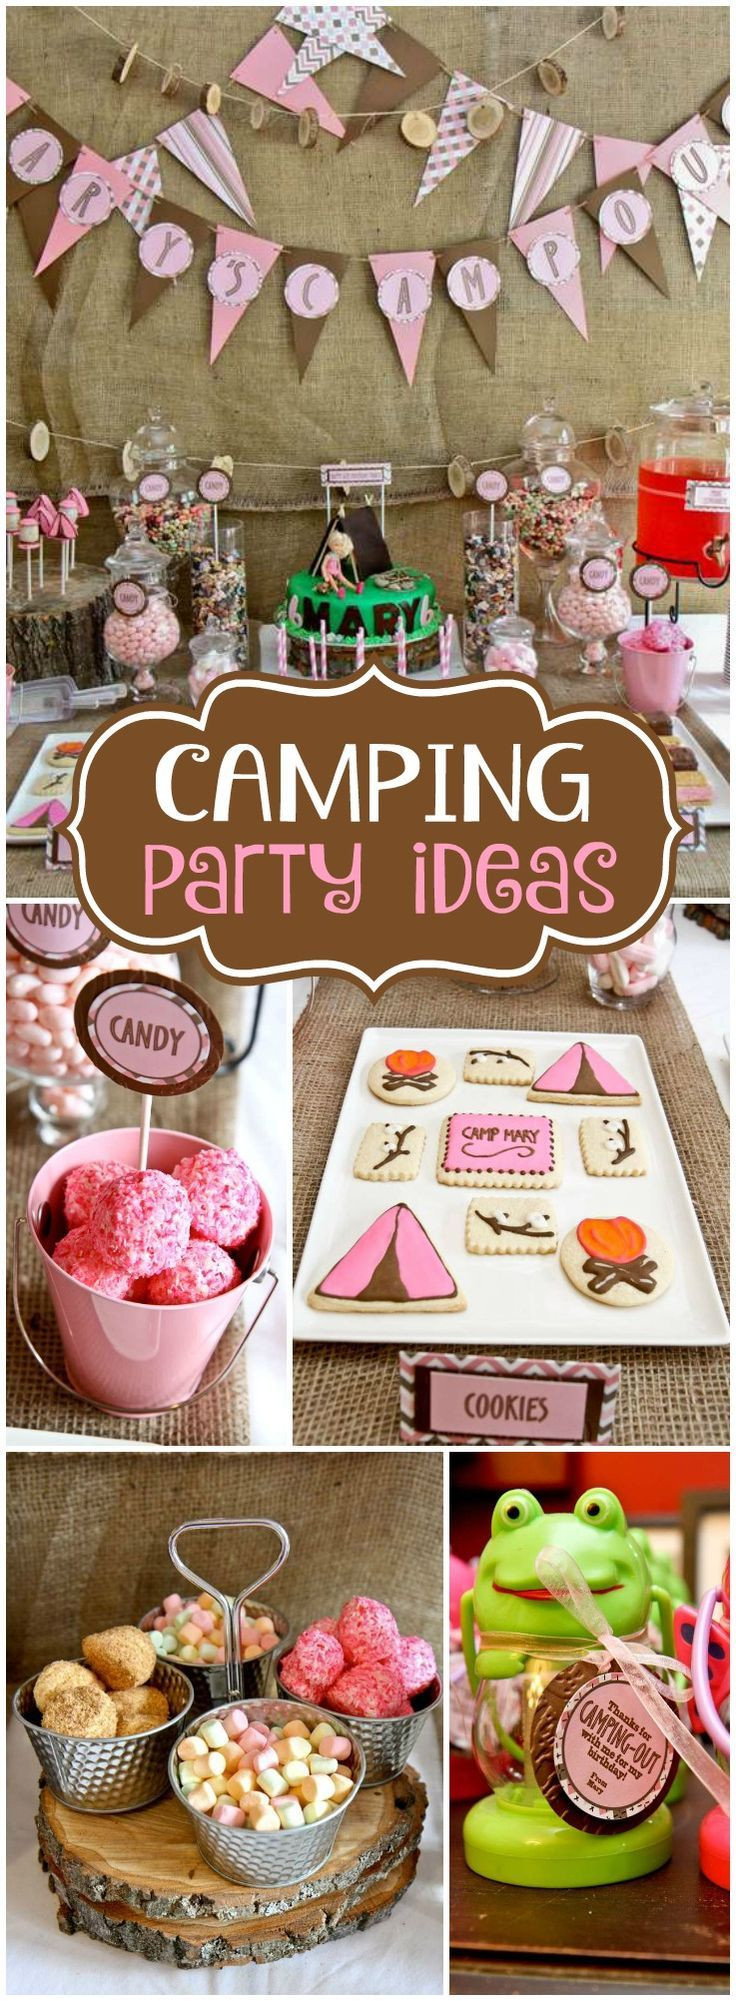 Indoor Birthday Party Ideas
 Camping Birthday "Camp Out Indoor Party"